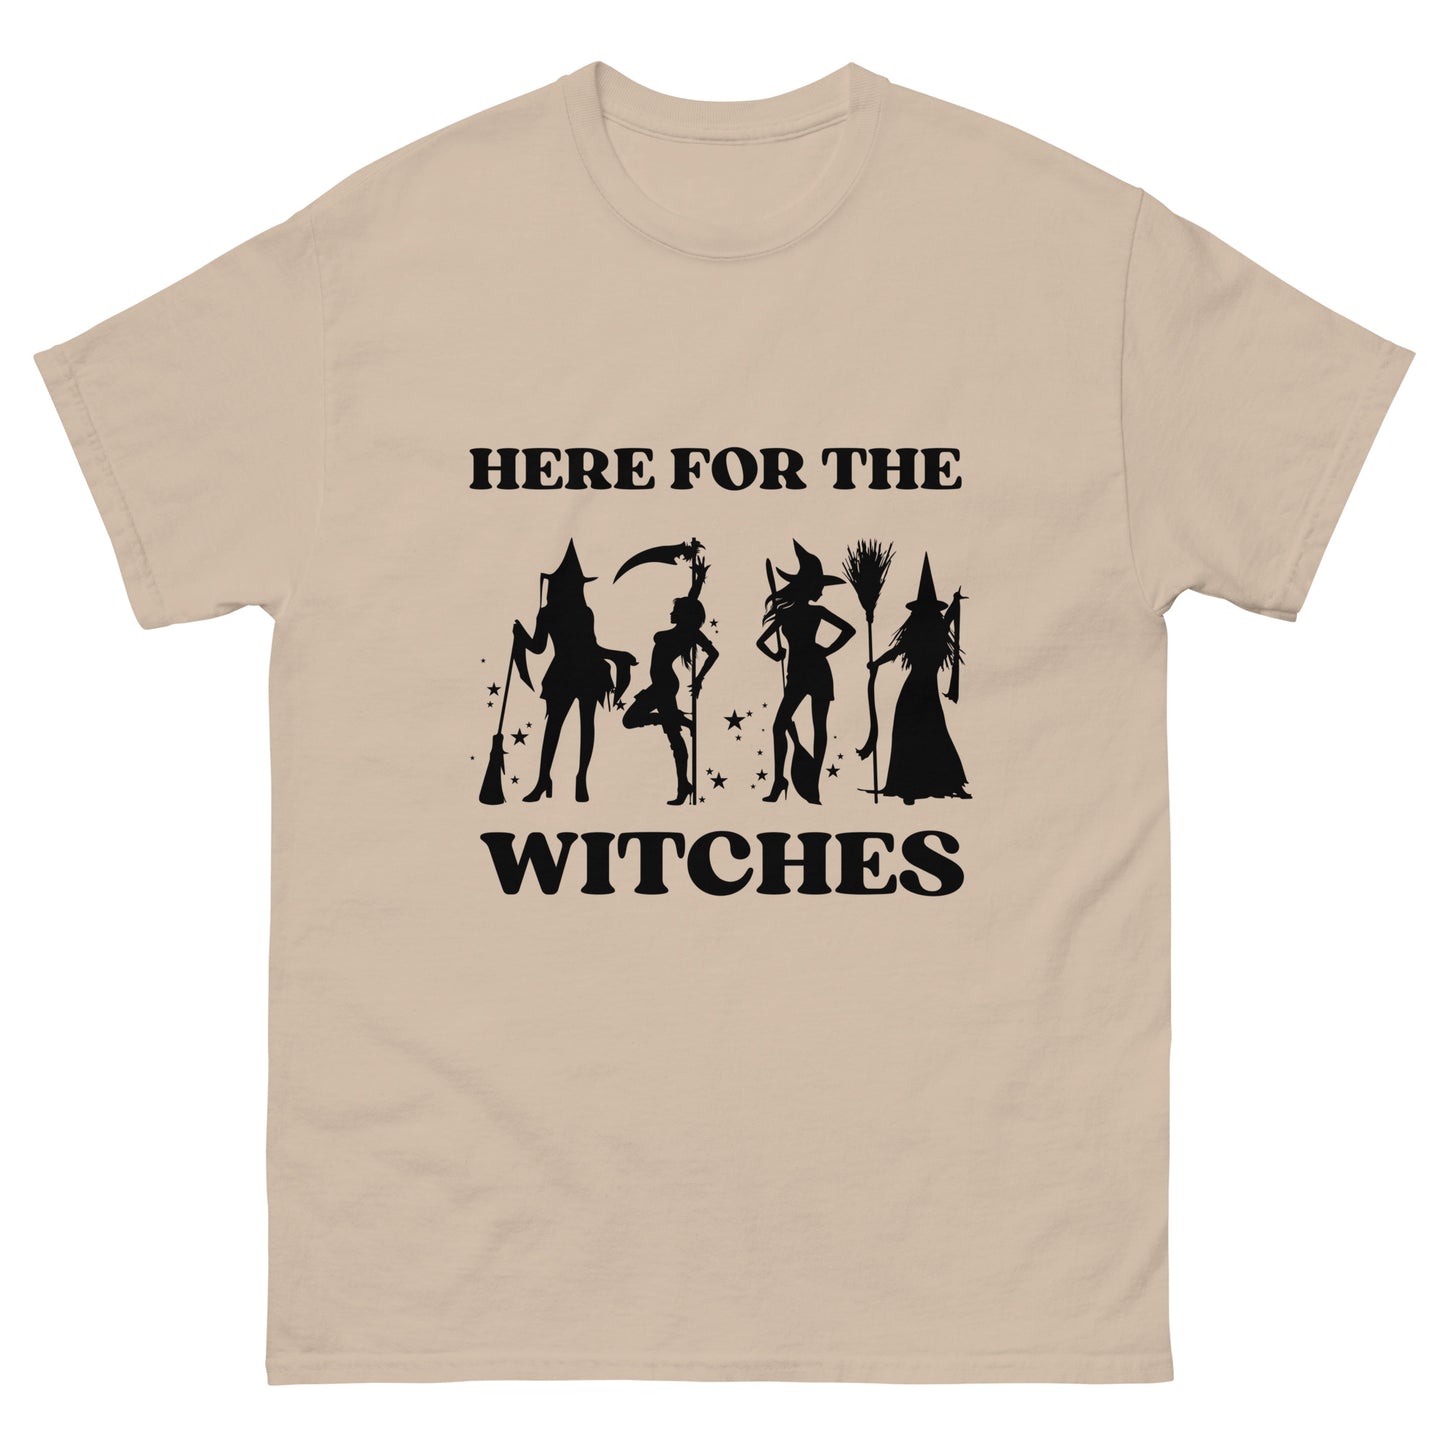 Here for the witches T-Shirt